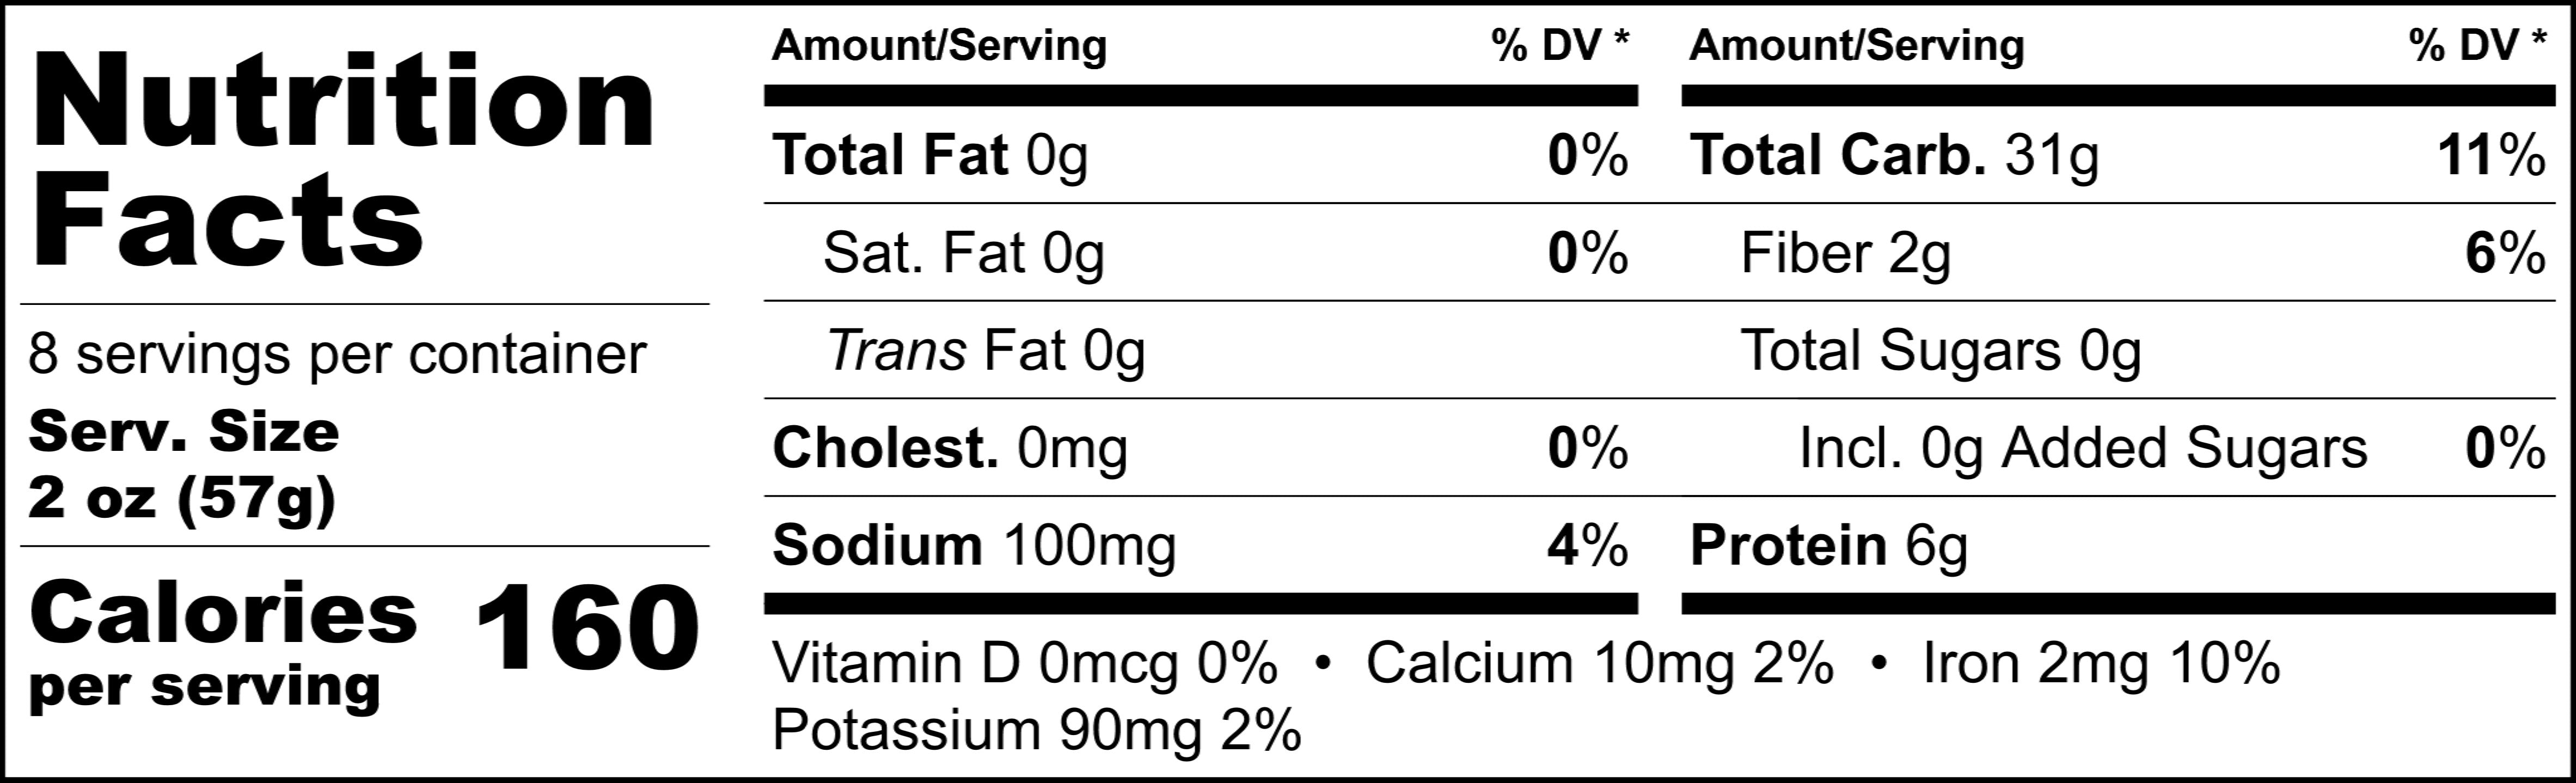 Pappardelle's Lemon Chive Angel Hair Nutritional Statement